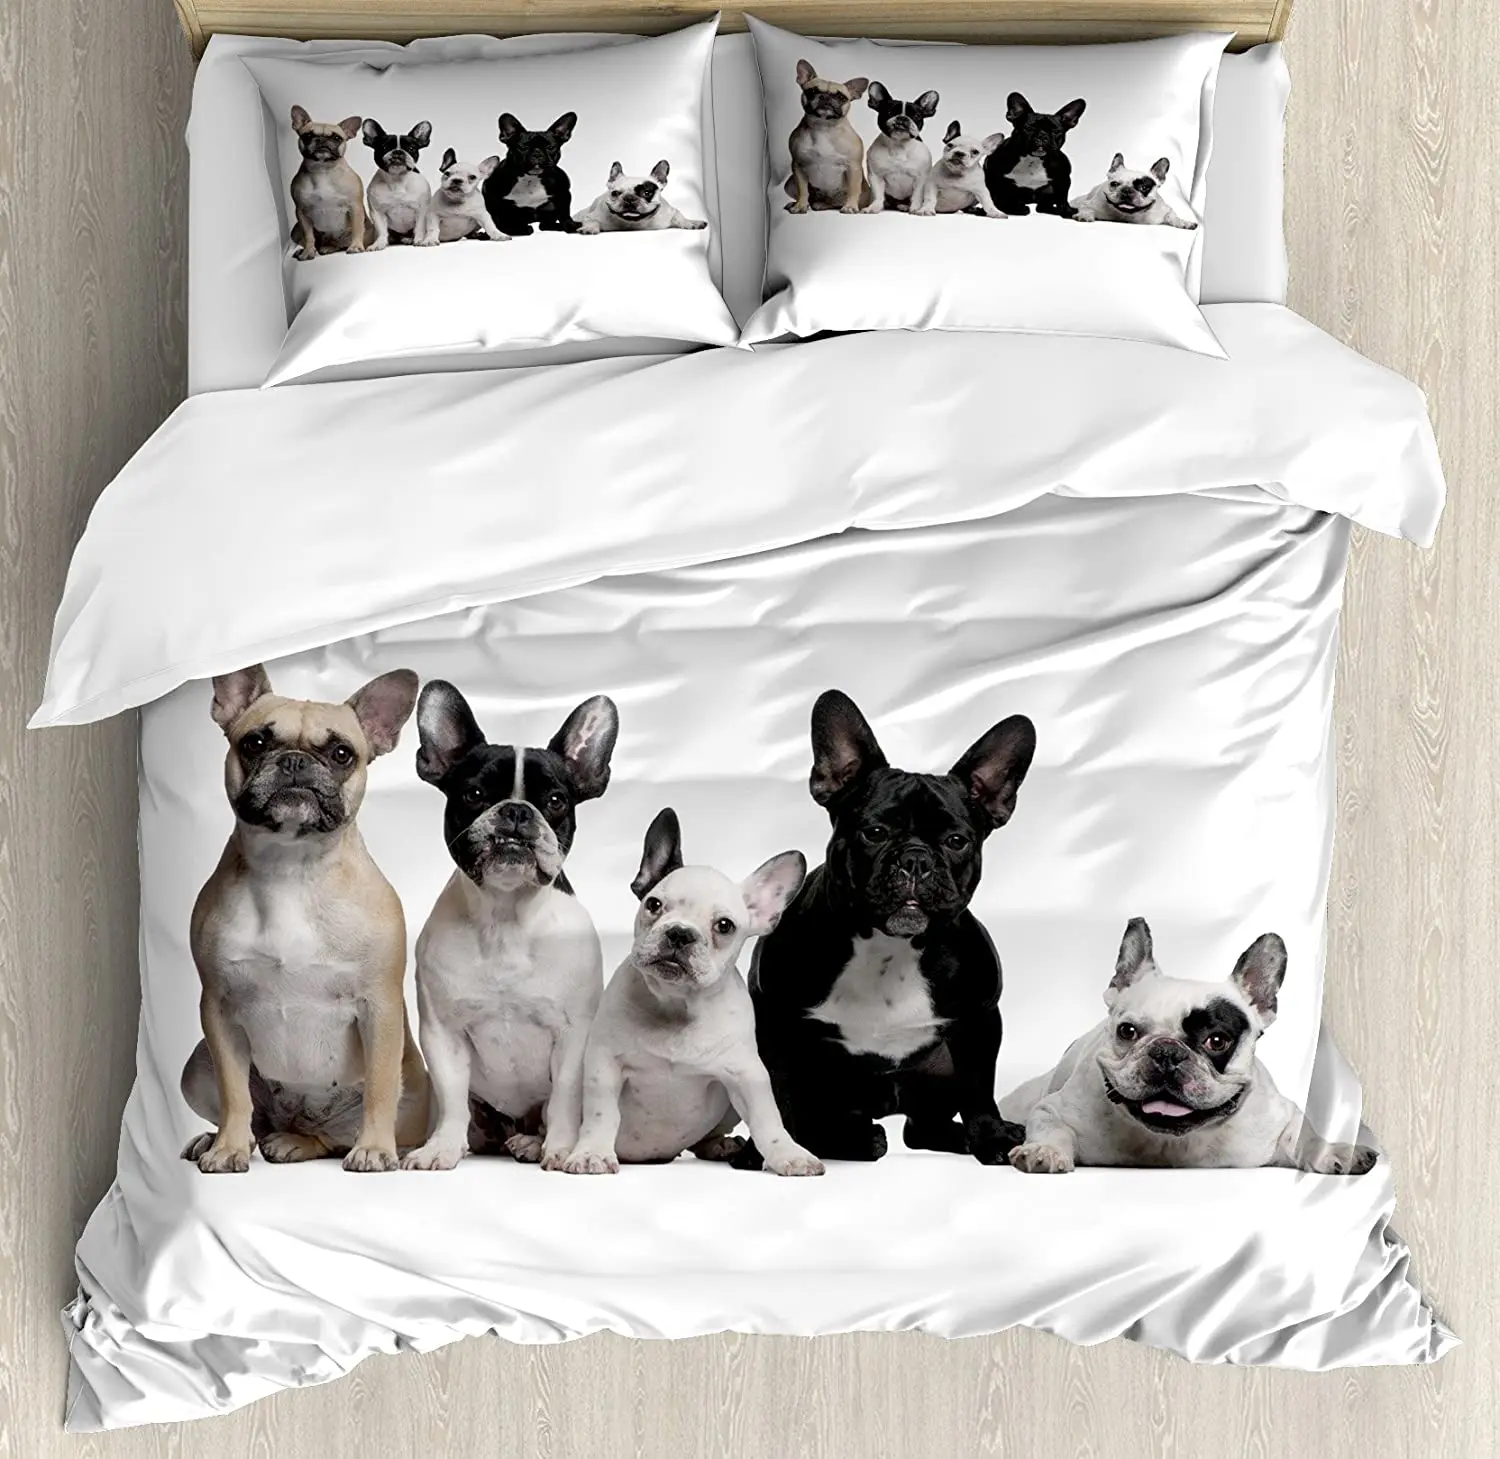 

Bulldog Duvet Cover Set Group of Young French Bulldogs with Adorable Expressions Animal Lover Photo Bedding Set for Home